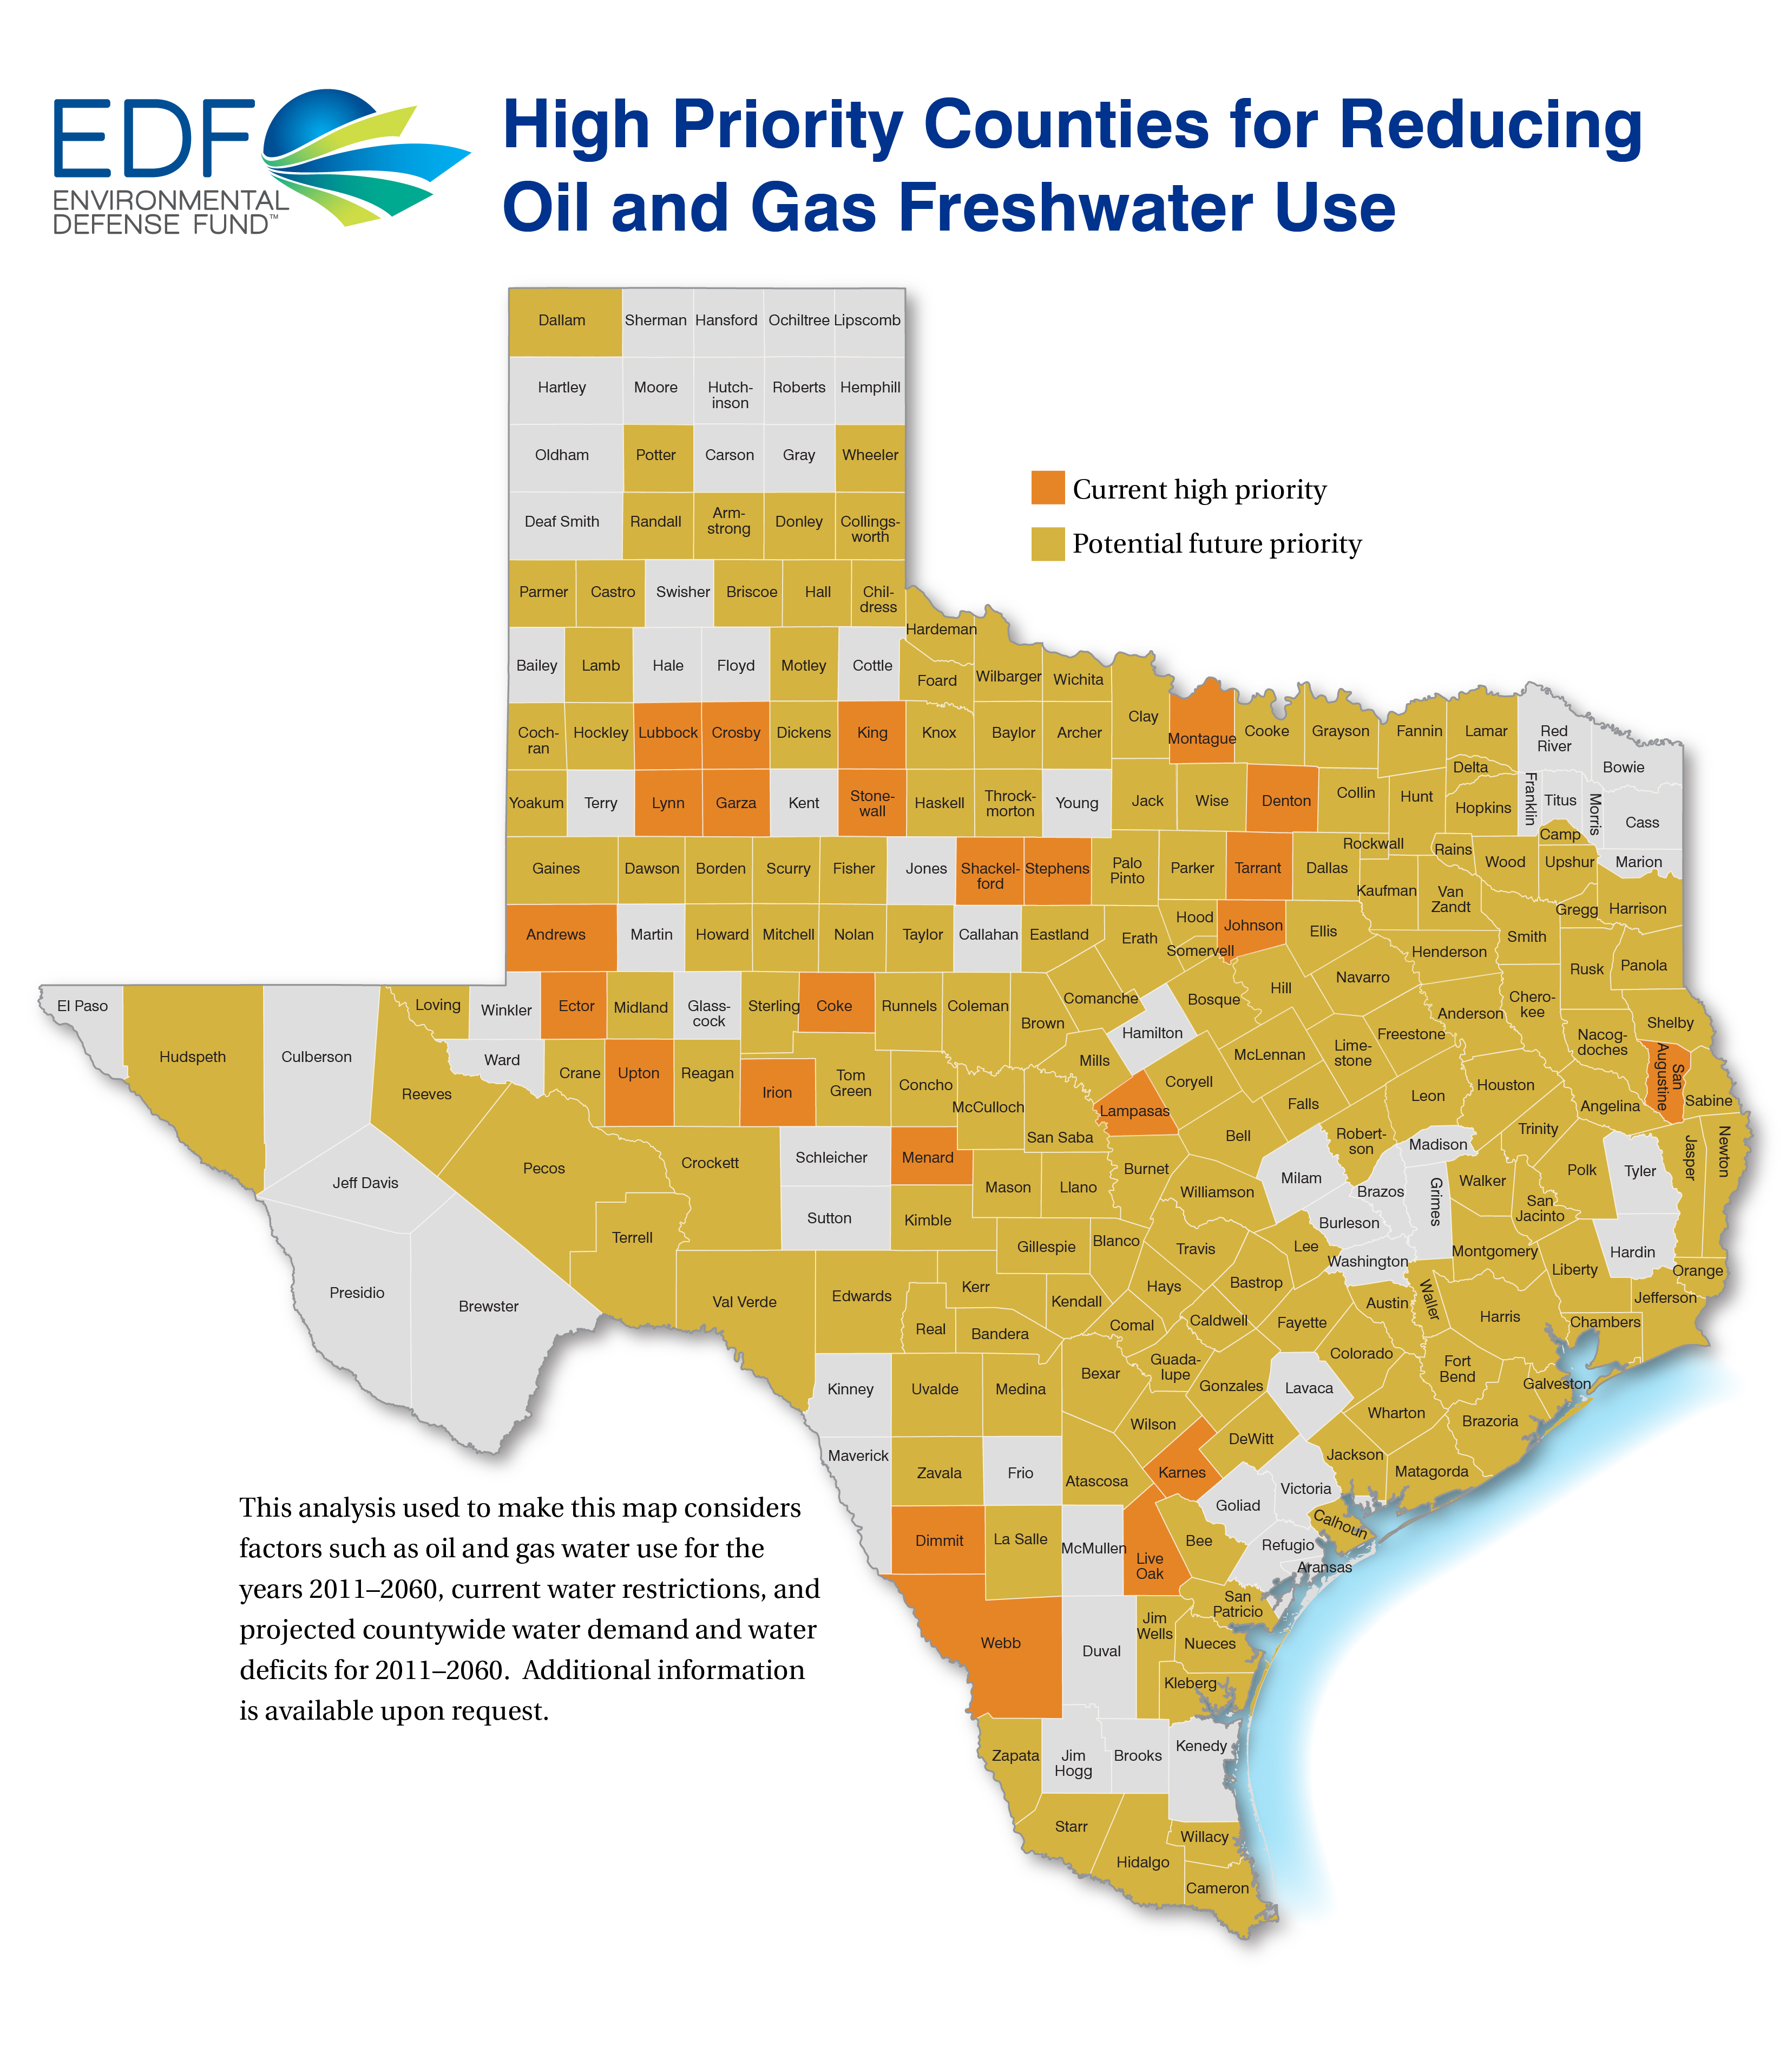 2013_Palacios_In-Texas-Freshwater-Use-For-Oil-And-Gas-Should-Be - Texas Oil And Gas Well Map